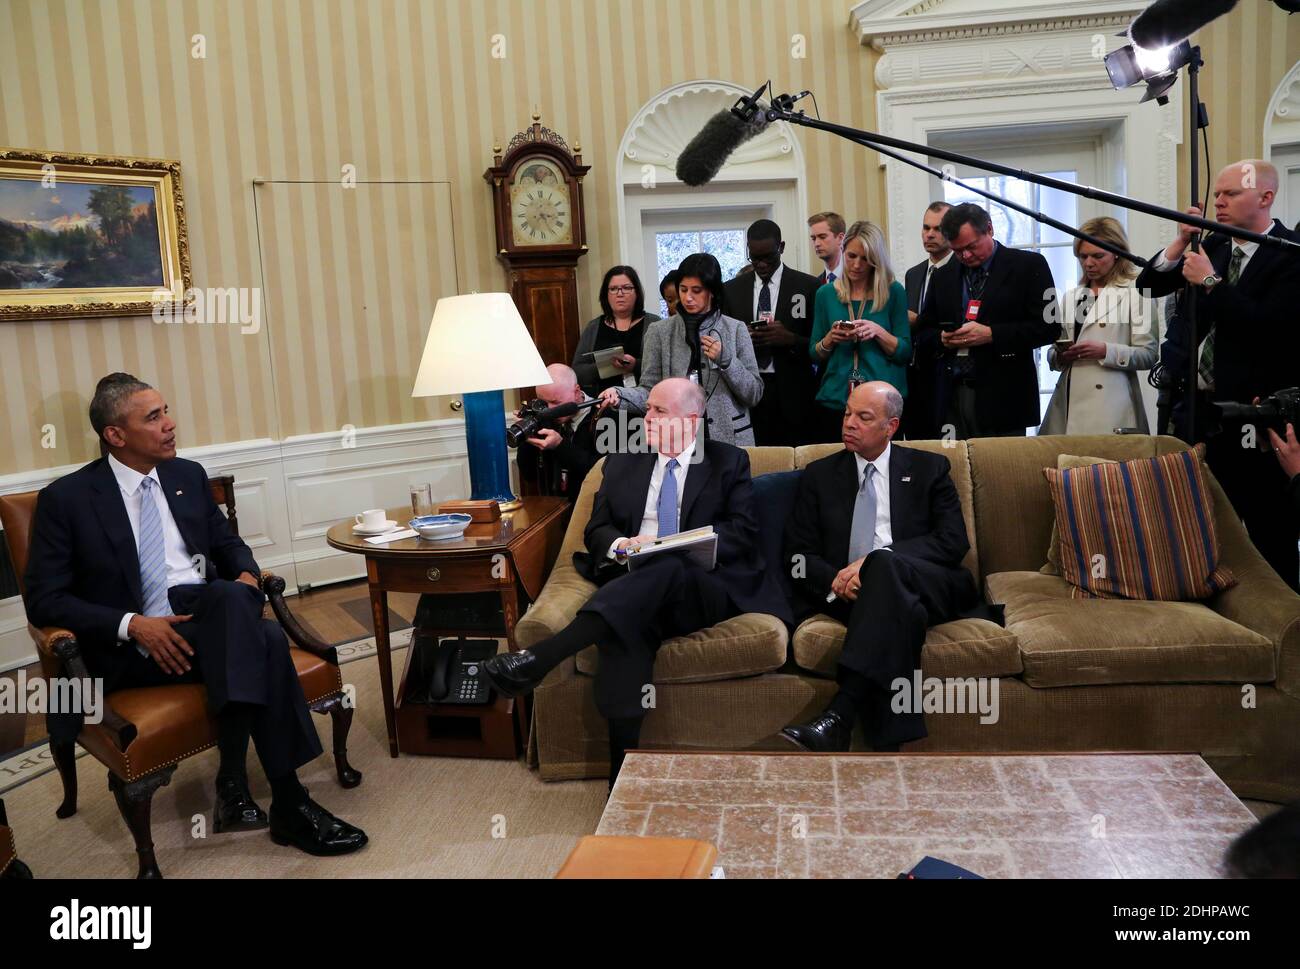 US President Barack Obama meets with former National Security Advisor Tom Donilon (C) and former IBM CEO Sam Palmisano (unseen), who are being appointed as the Chair and Vice Chair respectively of the Commission on Enhancing National Cybersecurity in the Oval Office of the White House, in Washington, DC, USA, February 17, 2016. Also present during this meeting are Commerce Secretary Penny Pritzker (unseen) and Secretary of Homeland Security Jeh Johnson (R). Photo by Aude Guerrucci/Pool/ABACAPRESS.COM Stock Photo